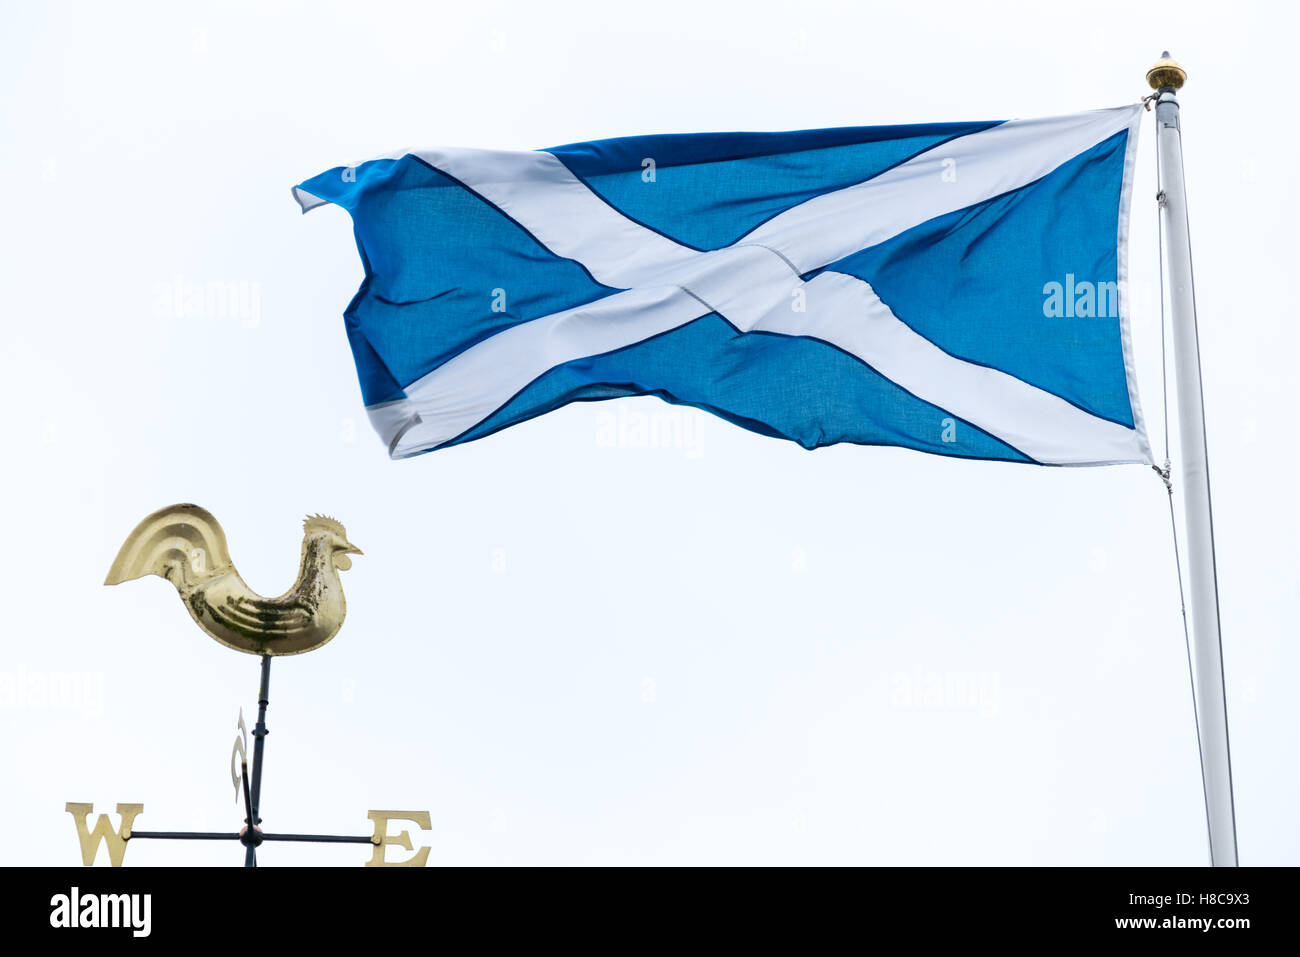 The wind comes from the east to blow the Scottish Saltire flag towards the west Stock Photo